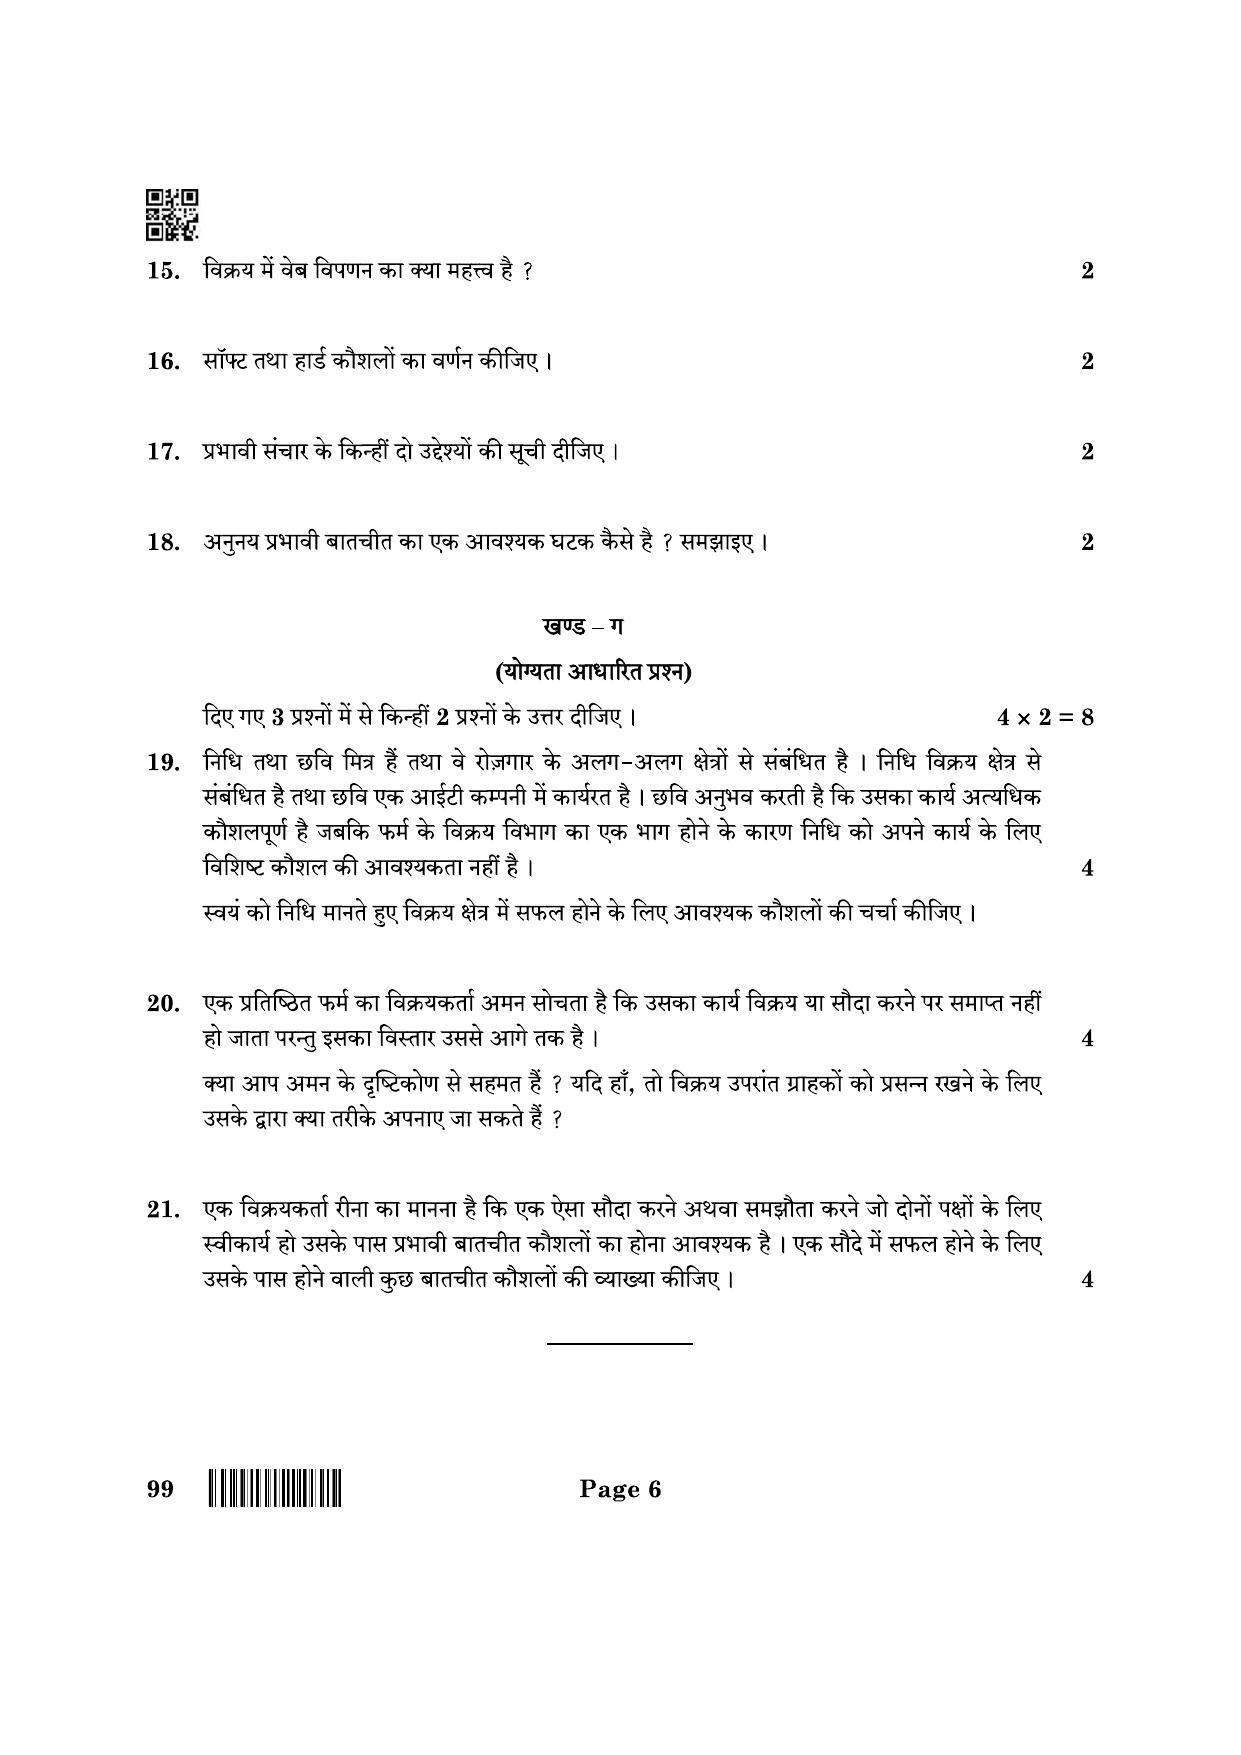 CBSE Class 10 99 Marketing And Sales 2022 Question Paper - Page 6